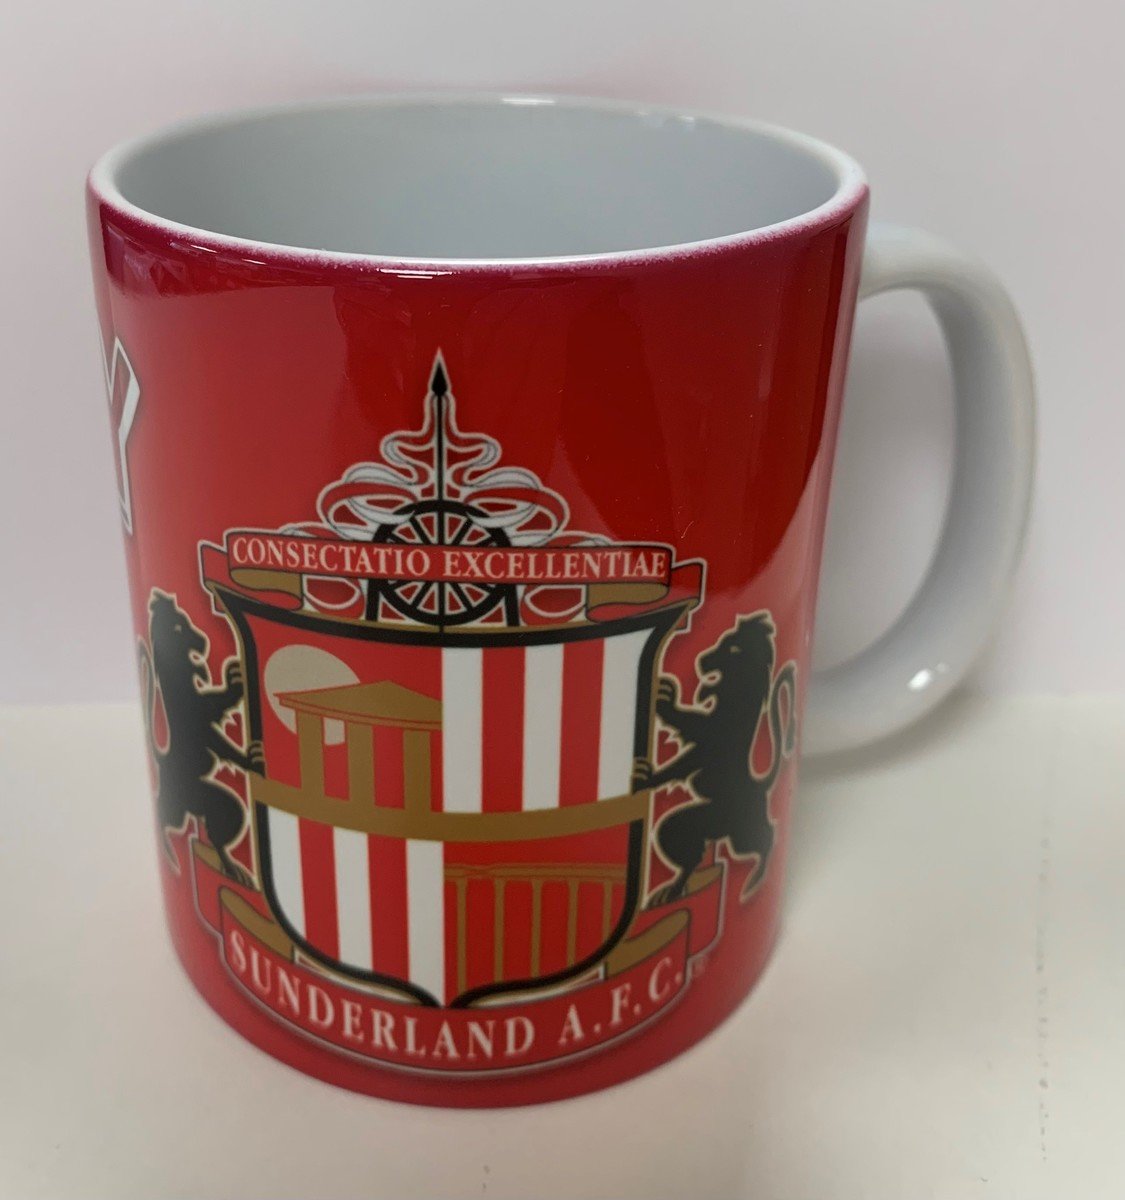 Buy the HAWAY THE LADS MUG online at Sunderland AFC Store